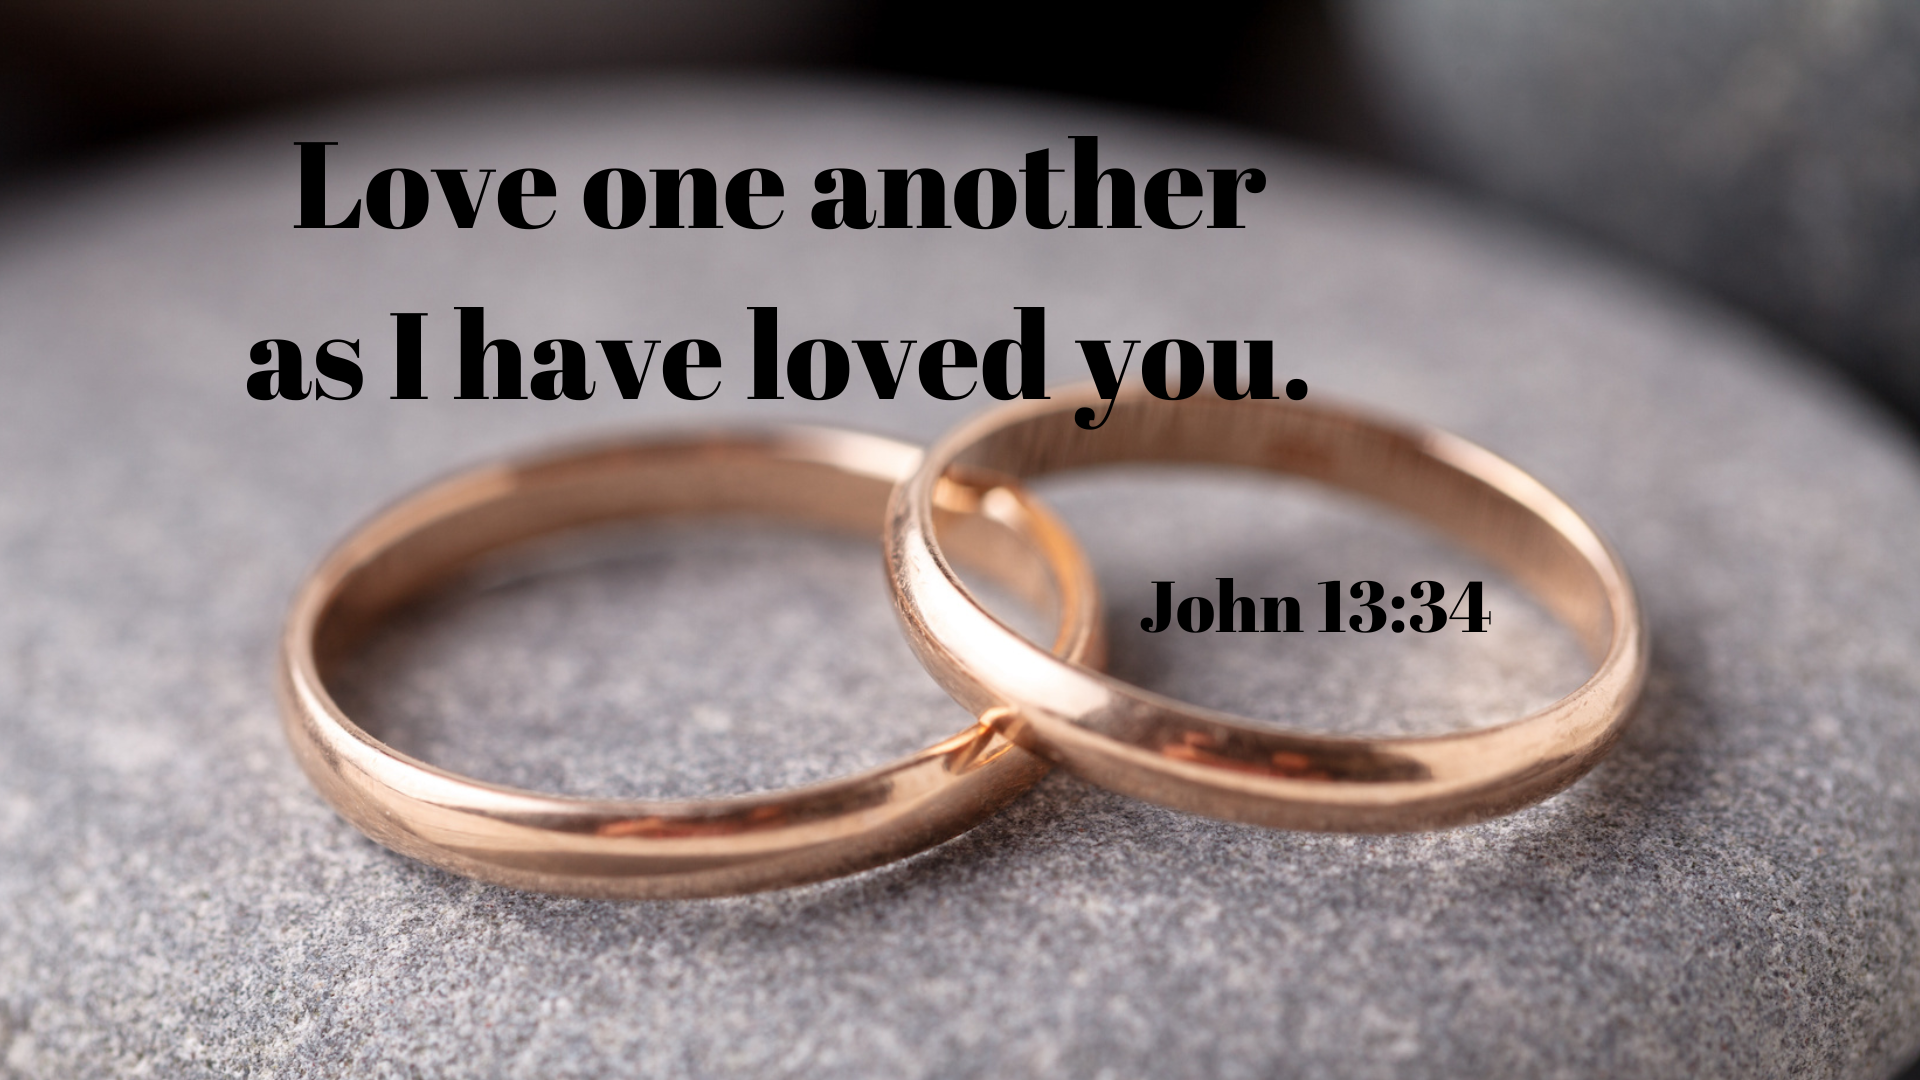 Love one another - Happy Marriage - Biblical Rules Stock Adobe